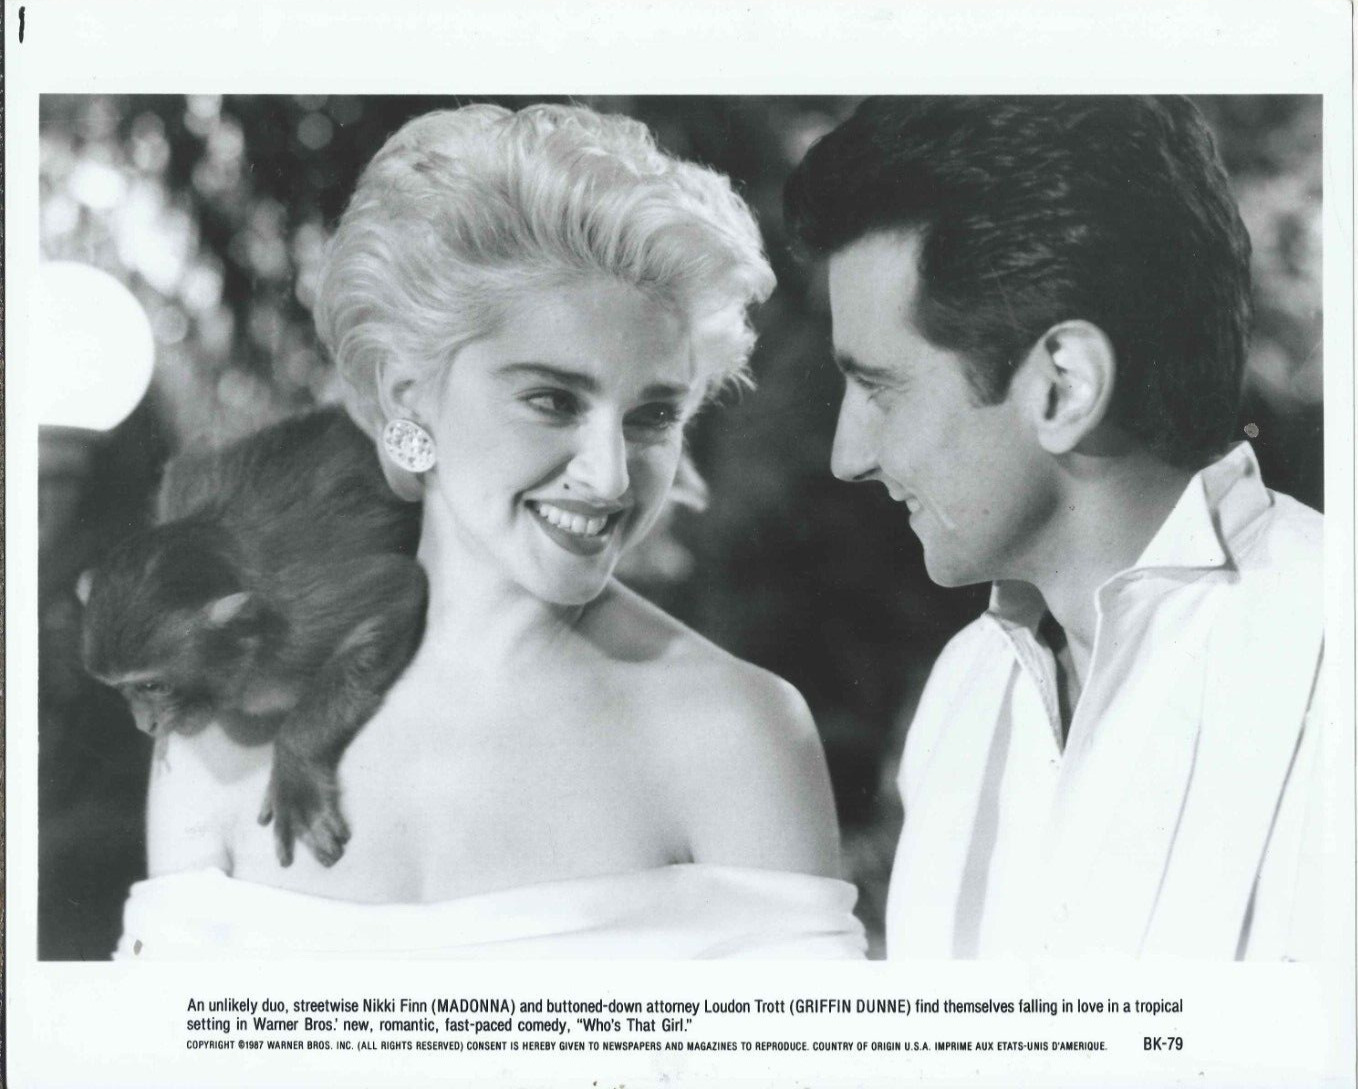 MADONNA WHOSE THAT GIRL GRIFFIN DUNNE  10X8  PHOTO  VINTAGE